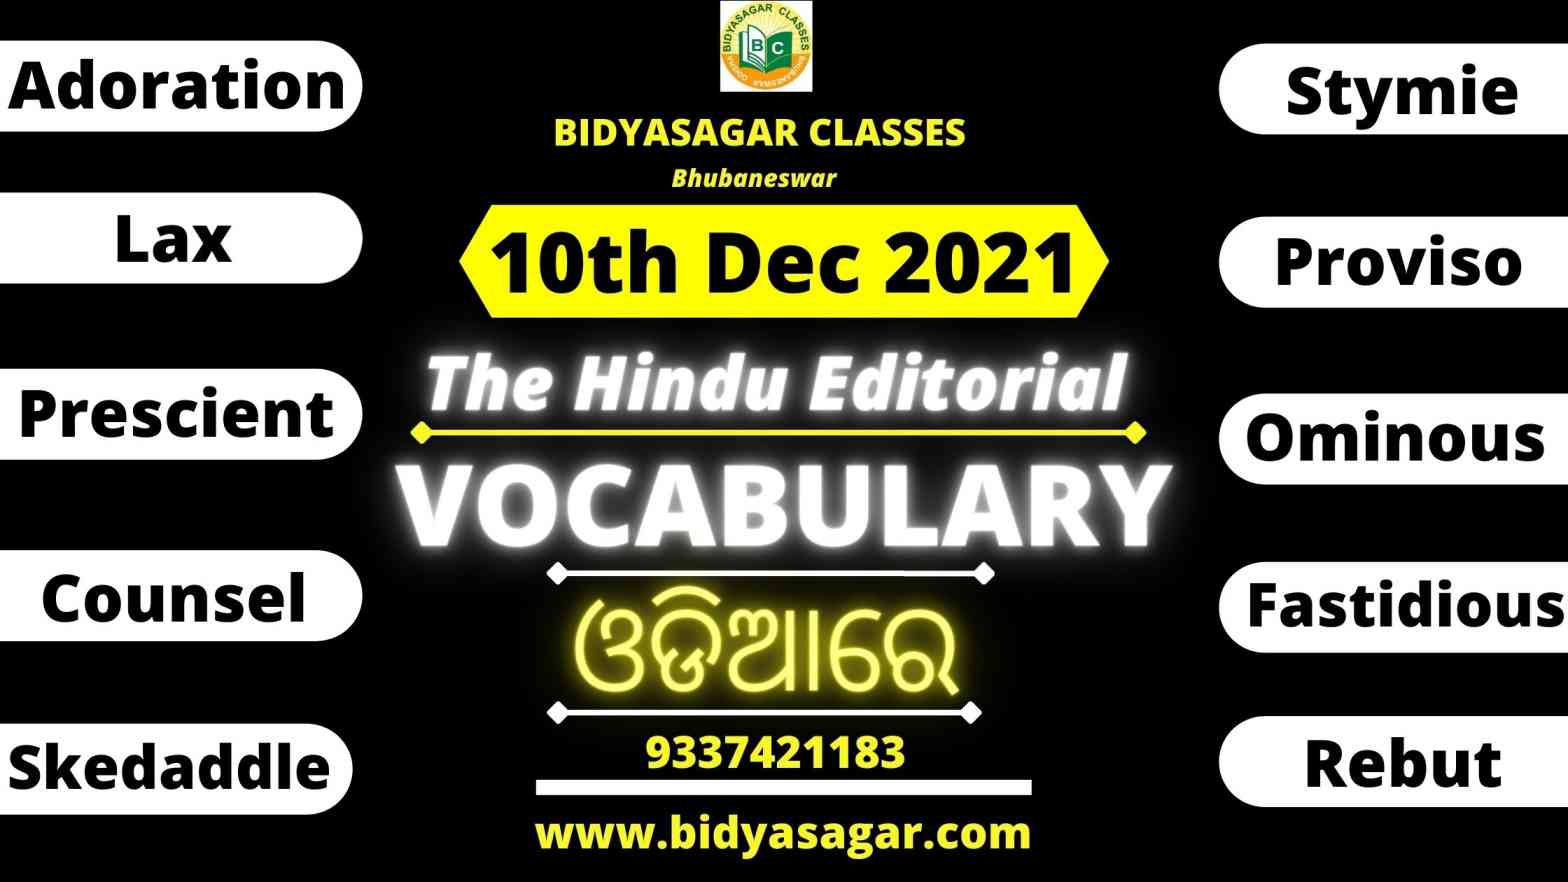 The Hindu Editorial Vocabulary of 10th December 2021